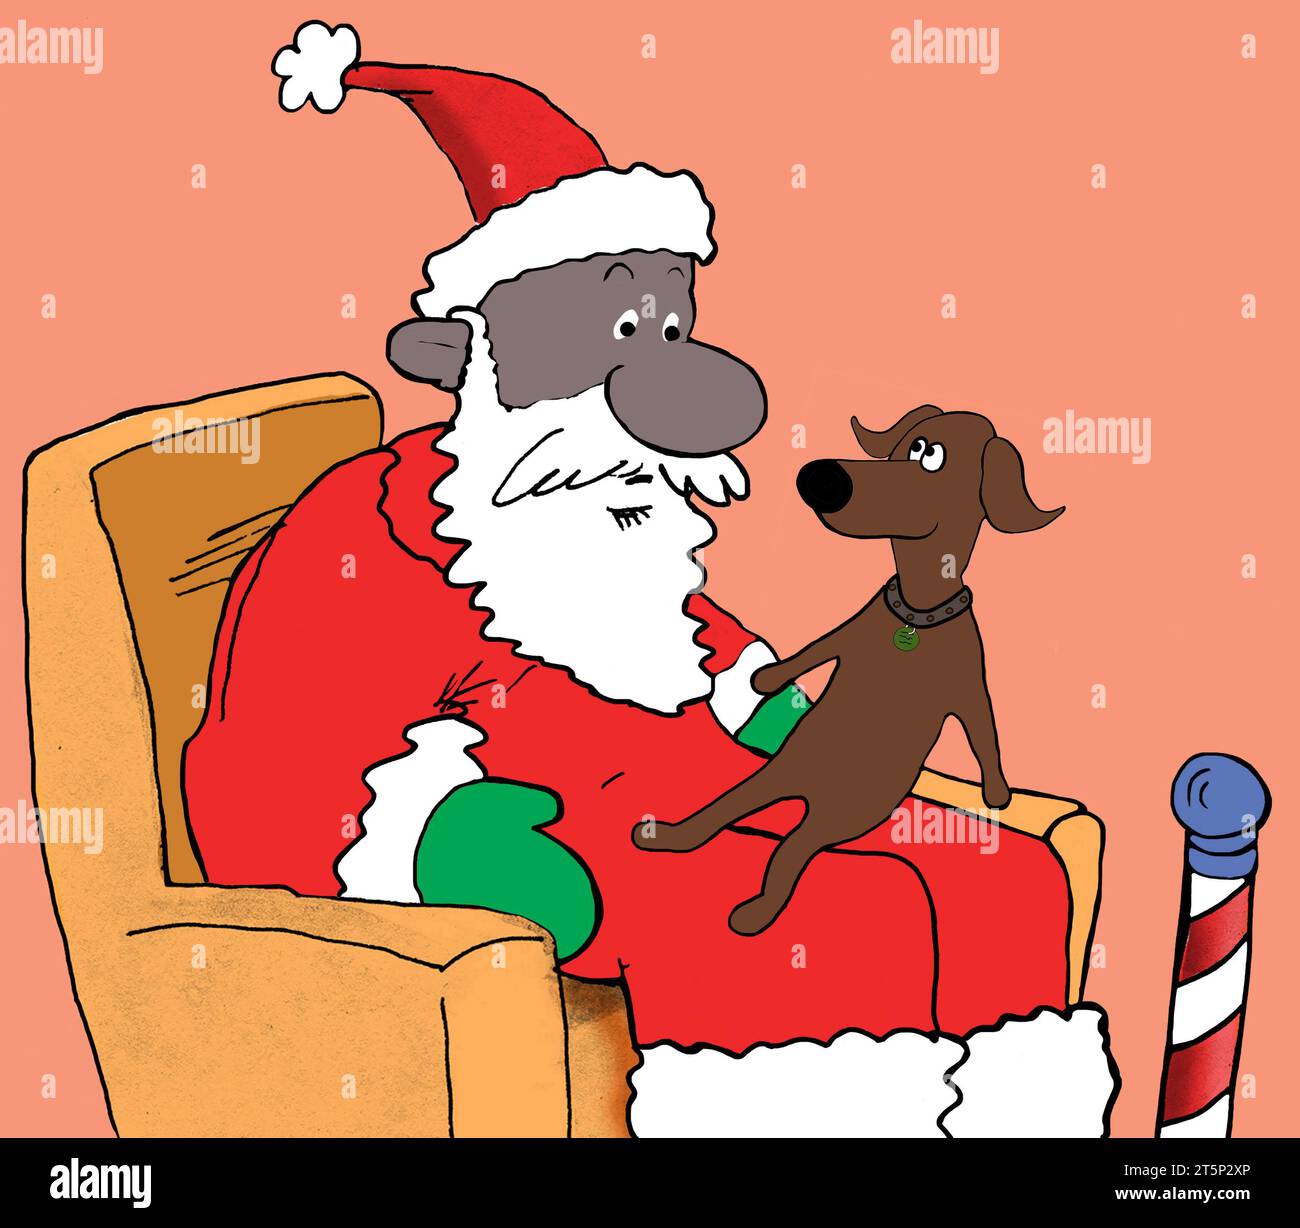 African American Santa Claus is listening to everyone's Christmas list wants, including the list from the brown dog. Stock Photo